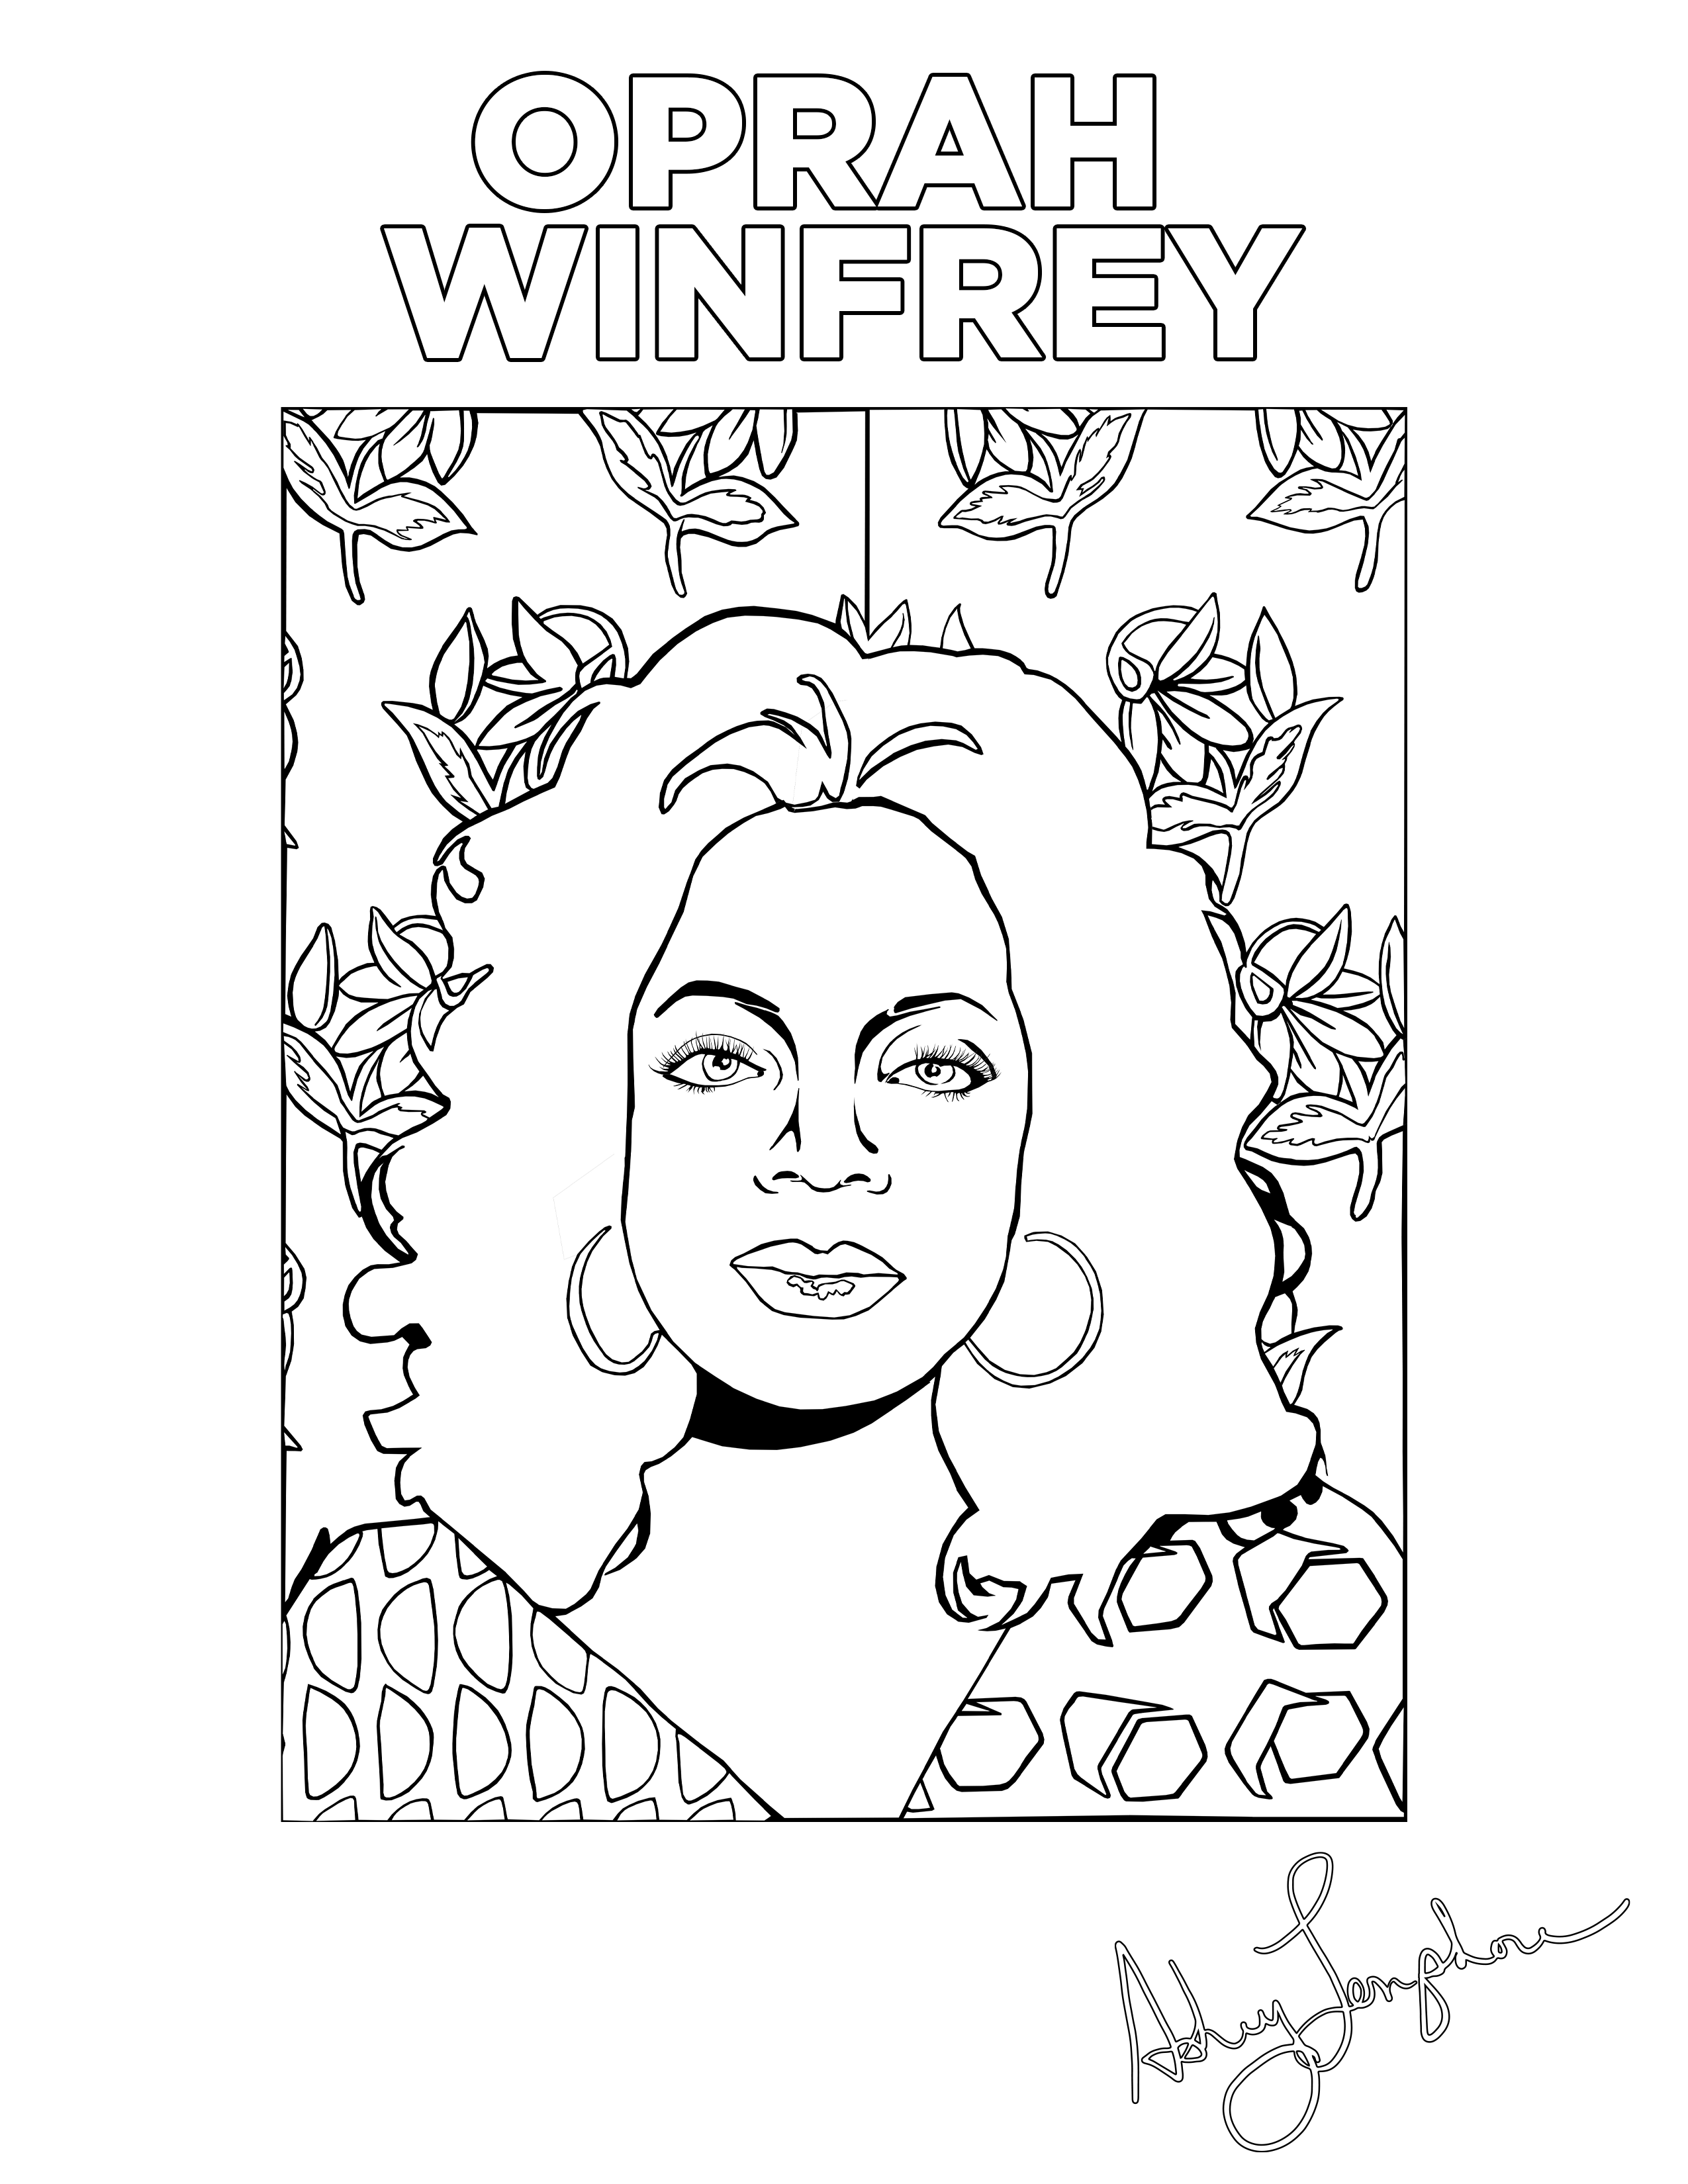 Ashley Longshore coloring pages featuring Oprah Winfrey.